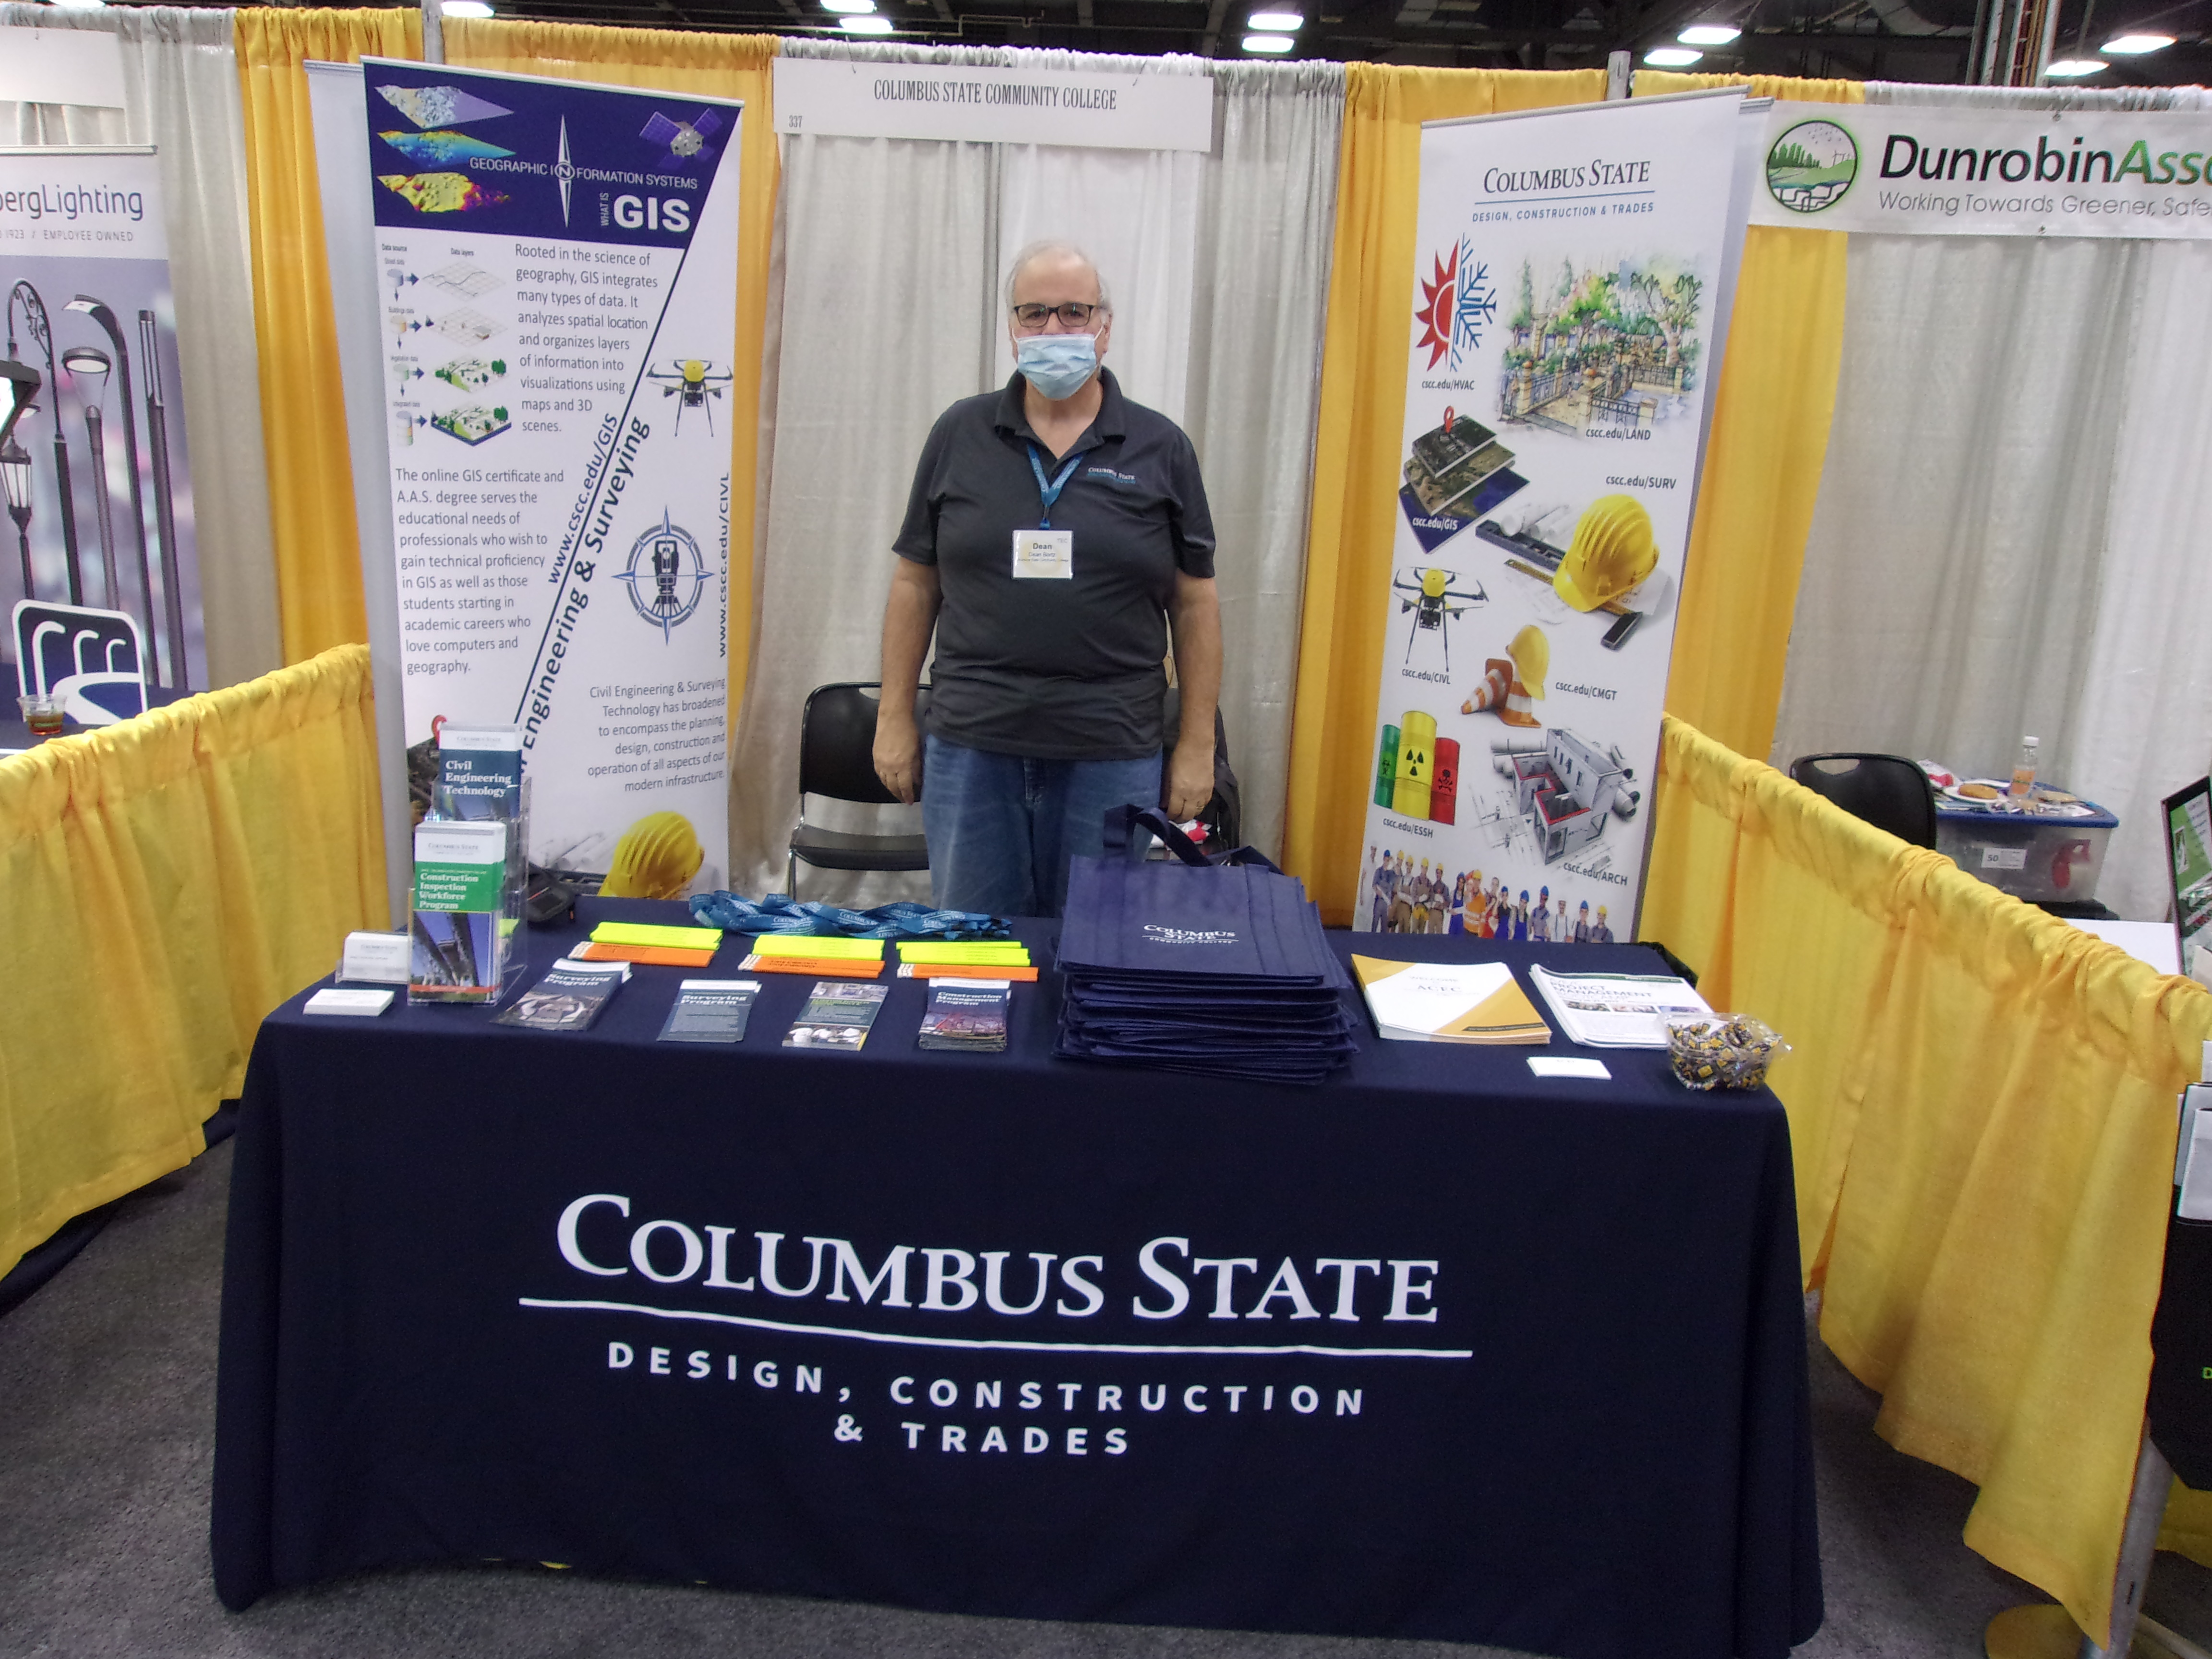 Dean Bortz, professor of Design, Construction & Trades, oversees Columbus State's booth at the expo.